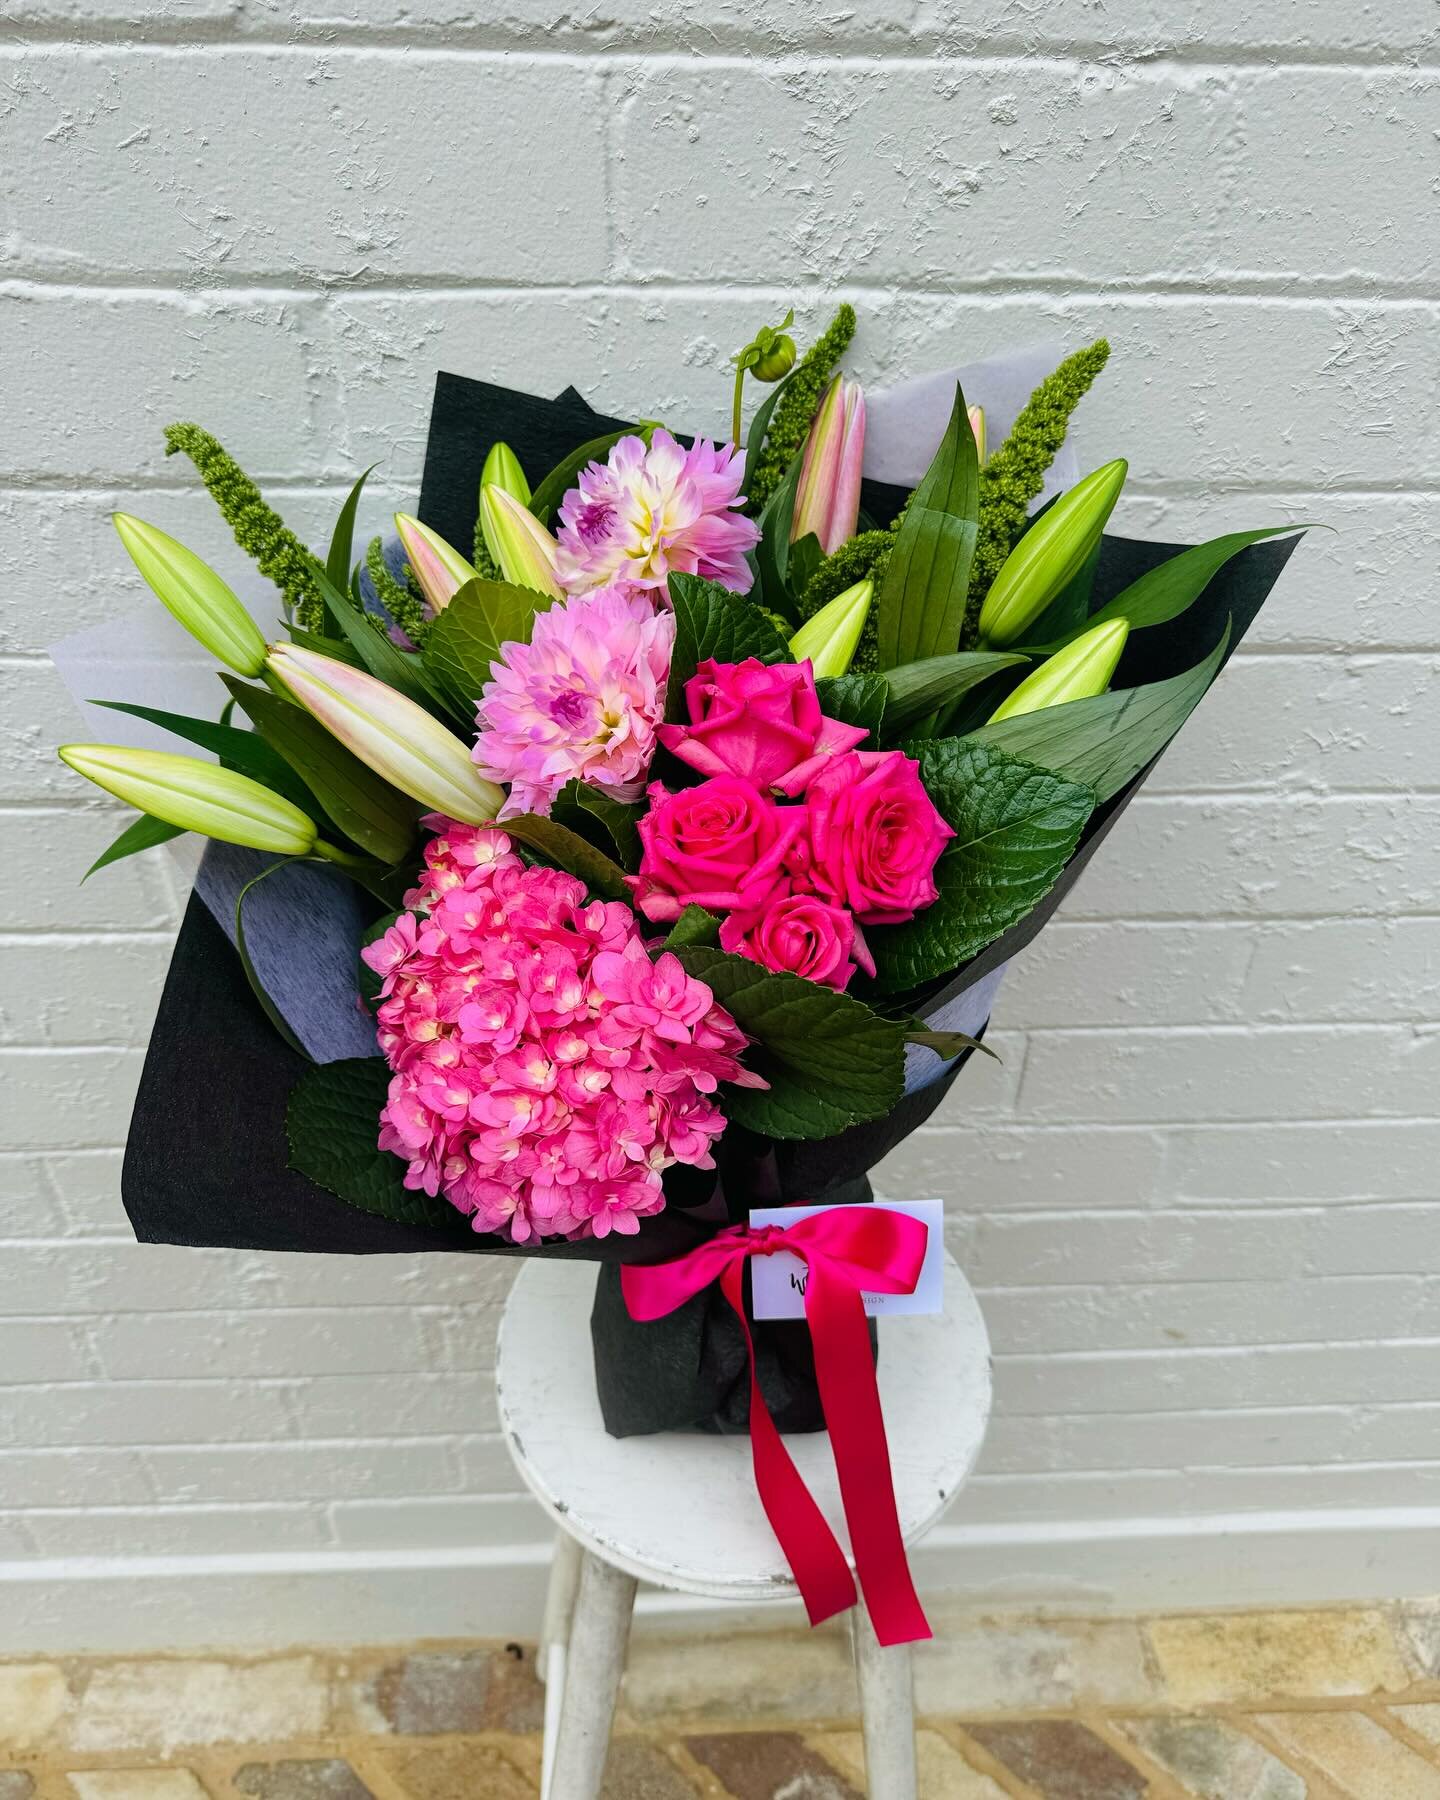 As the rain sets in for the weekend&hellip;Flowers brighten up everything 🌈 #flowers #floralstudio #giftbouquet #happybirthday #thankyou #thinkingofyou #congratulations #northshoreflorist #wattleitbee